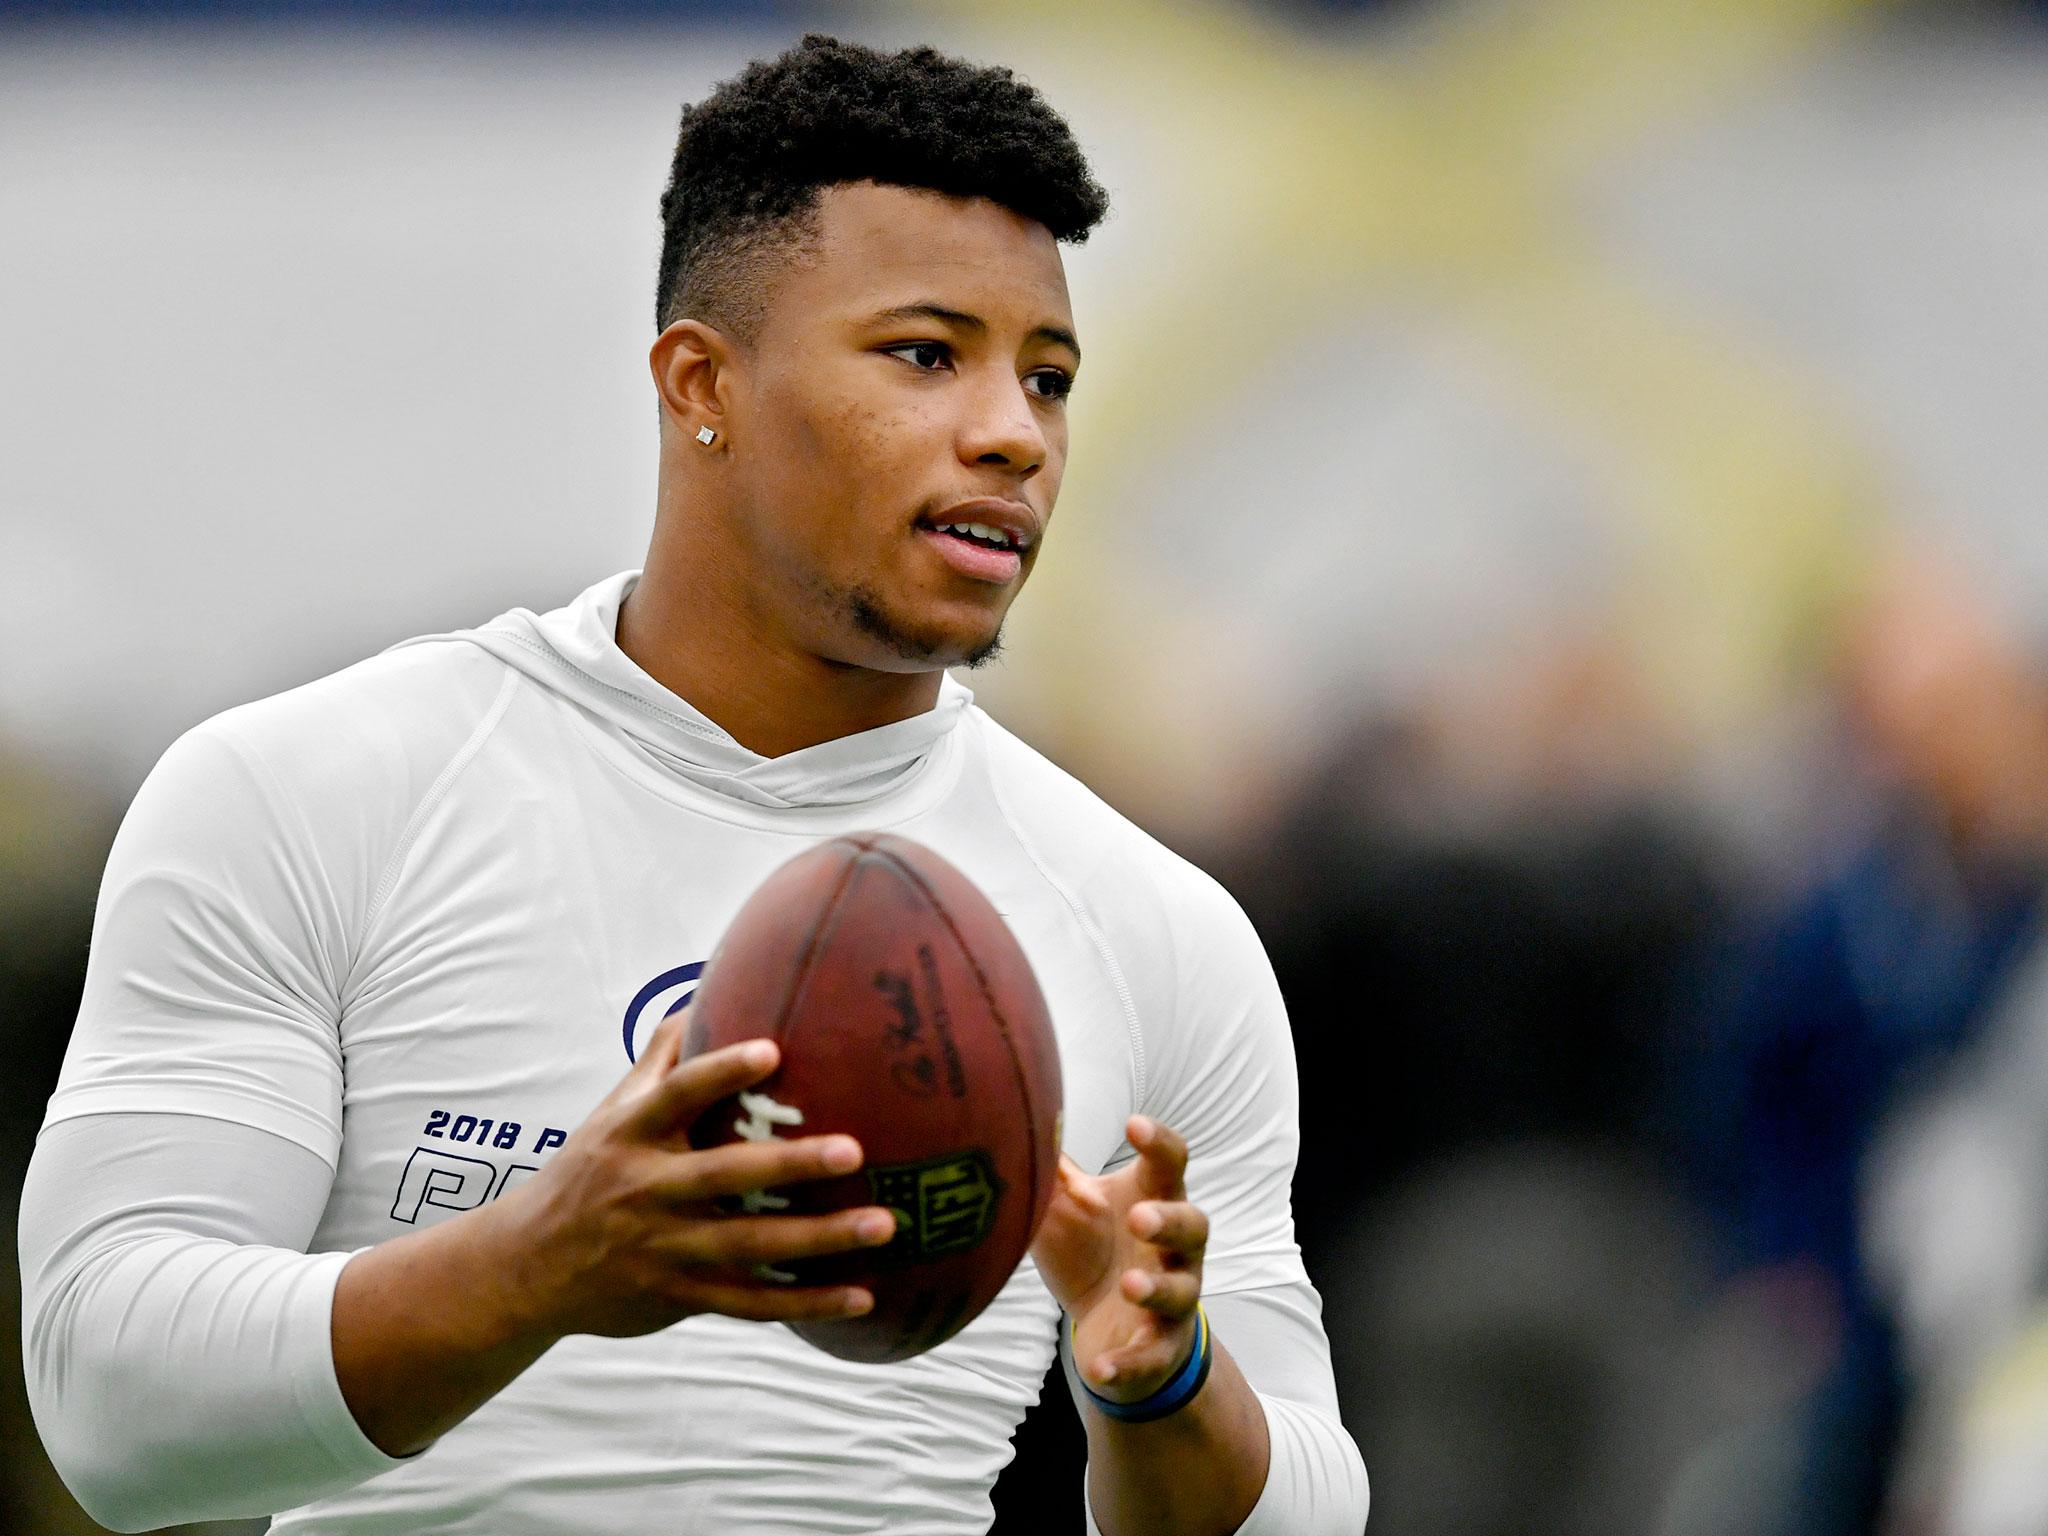 Saquon Barkley is an immensely-talented runner but how early is too early for an RB?